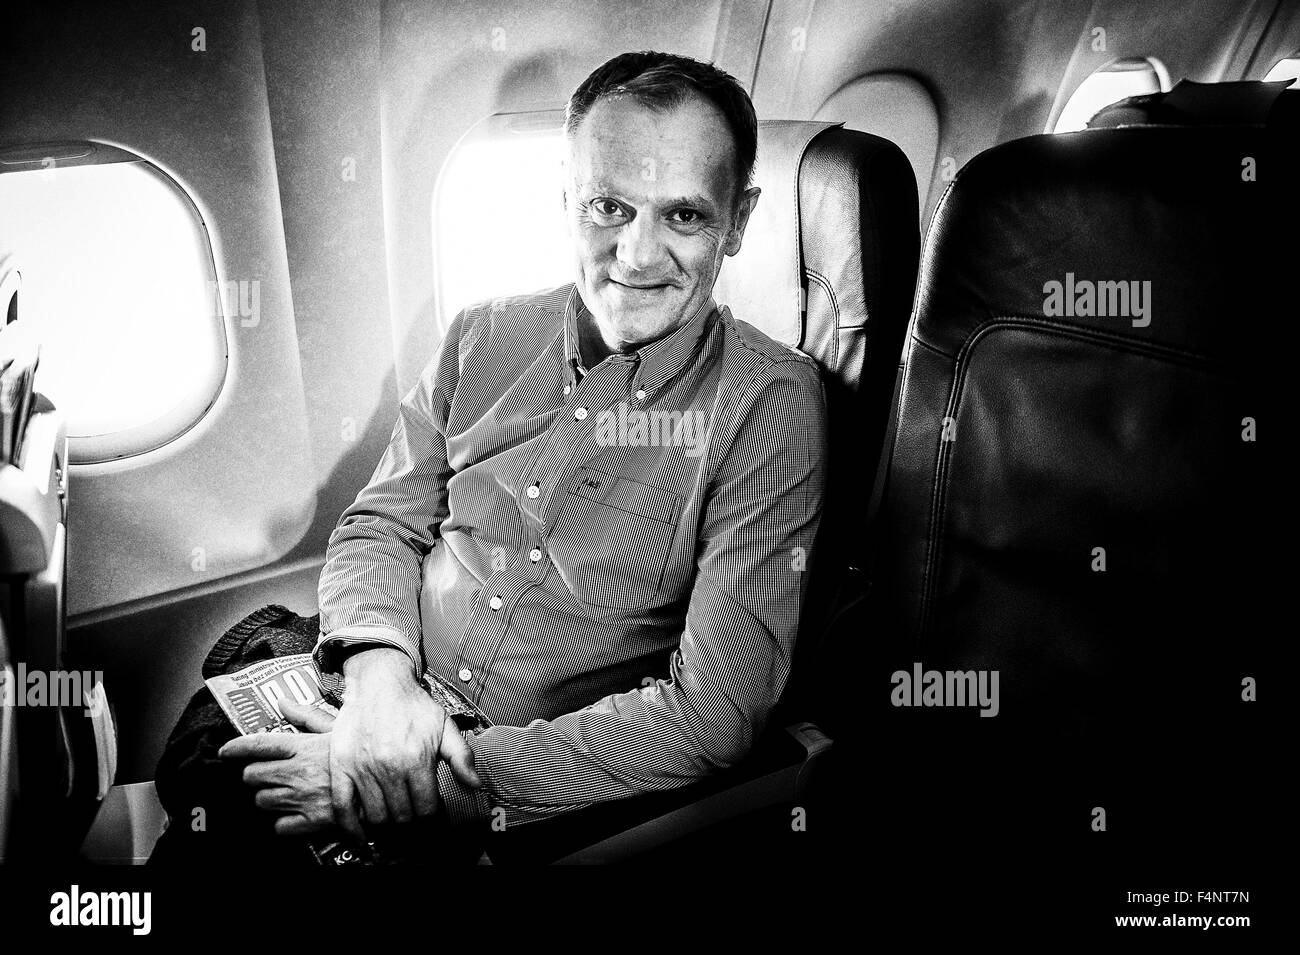 Donald Tusk, the president of the European Council at the board of airplane on his way for EPP European People Party in Madrit, Spainon 21.10.2015 by Wiktor Dabkowski Stock Photo